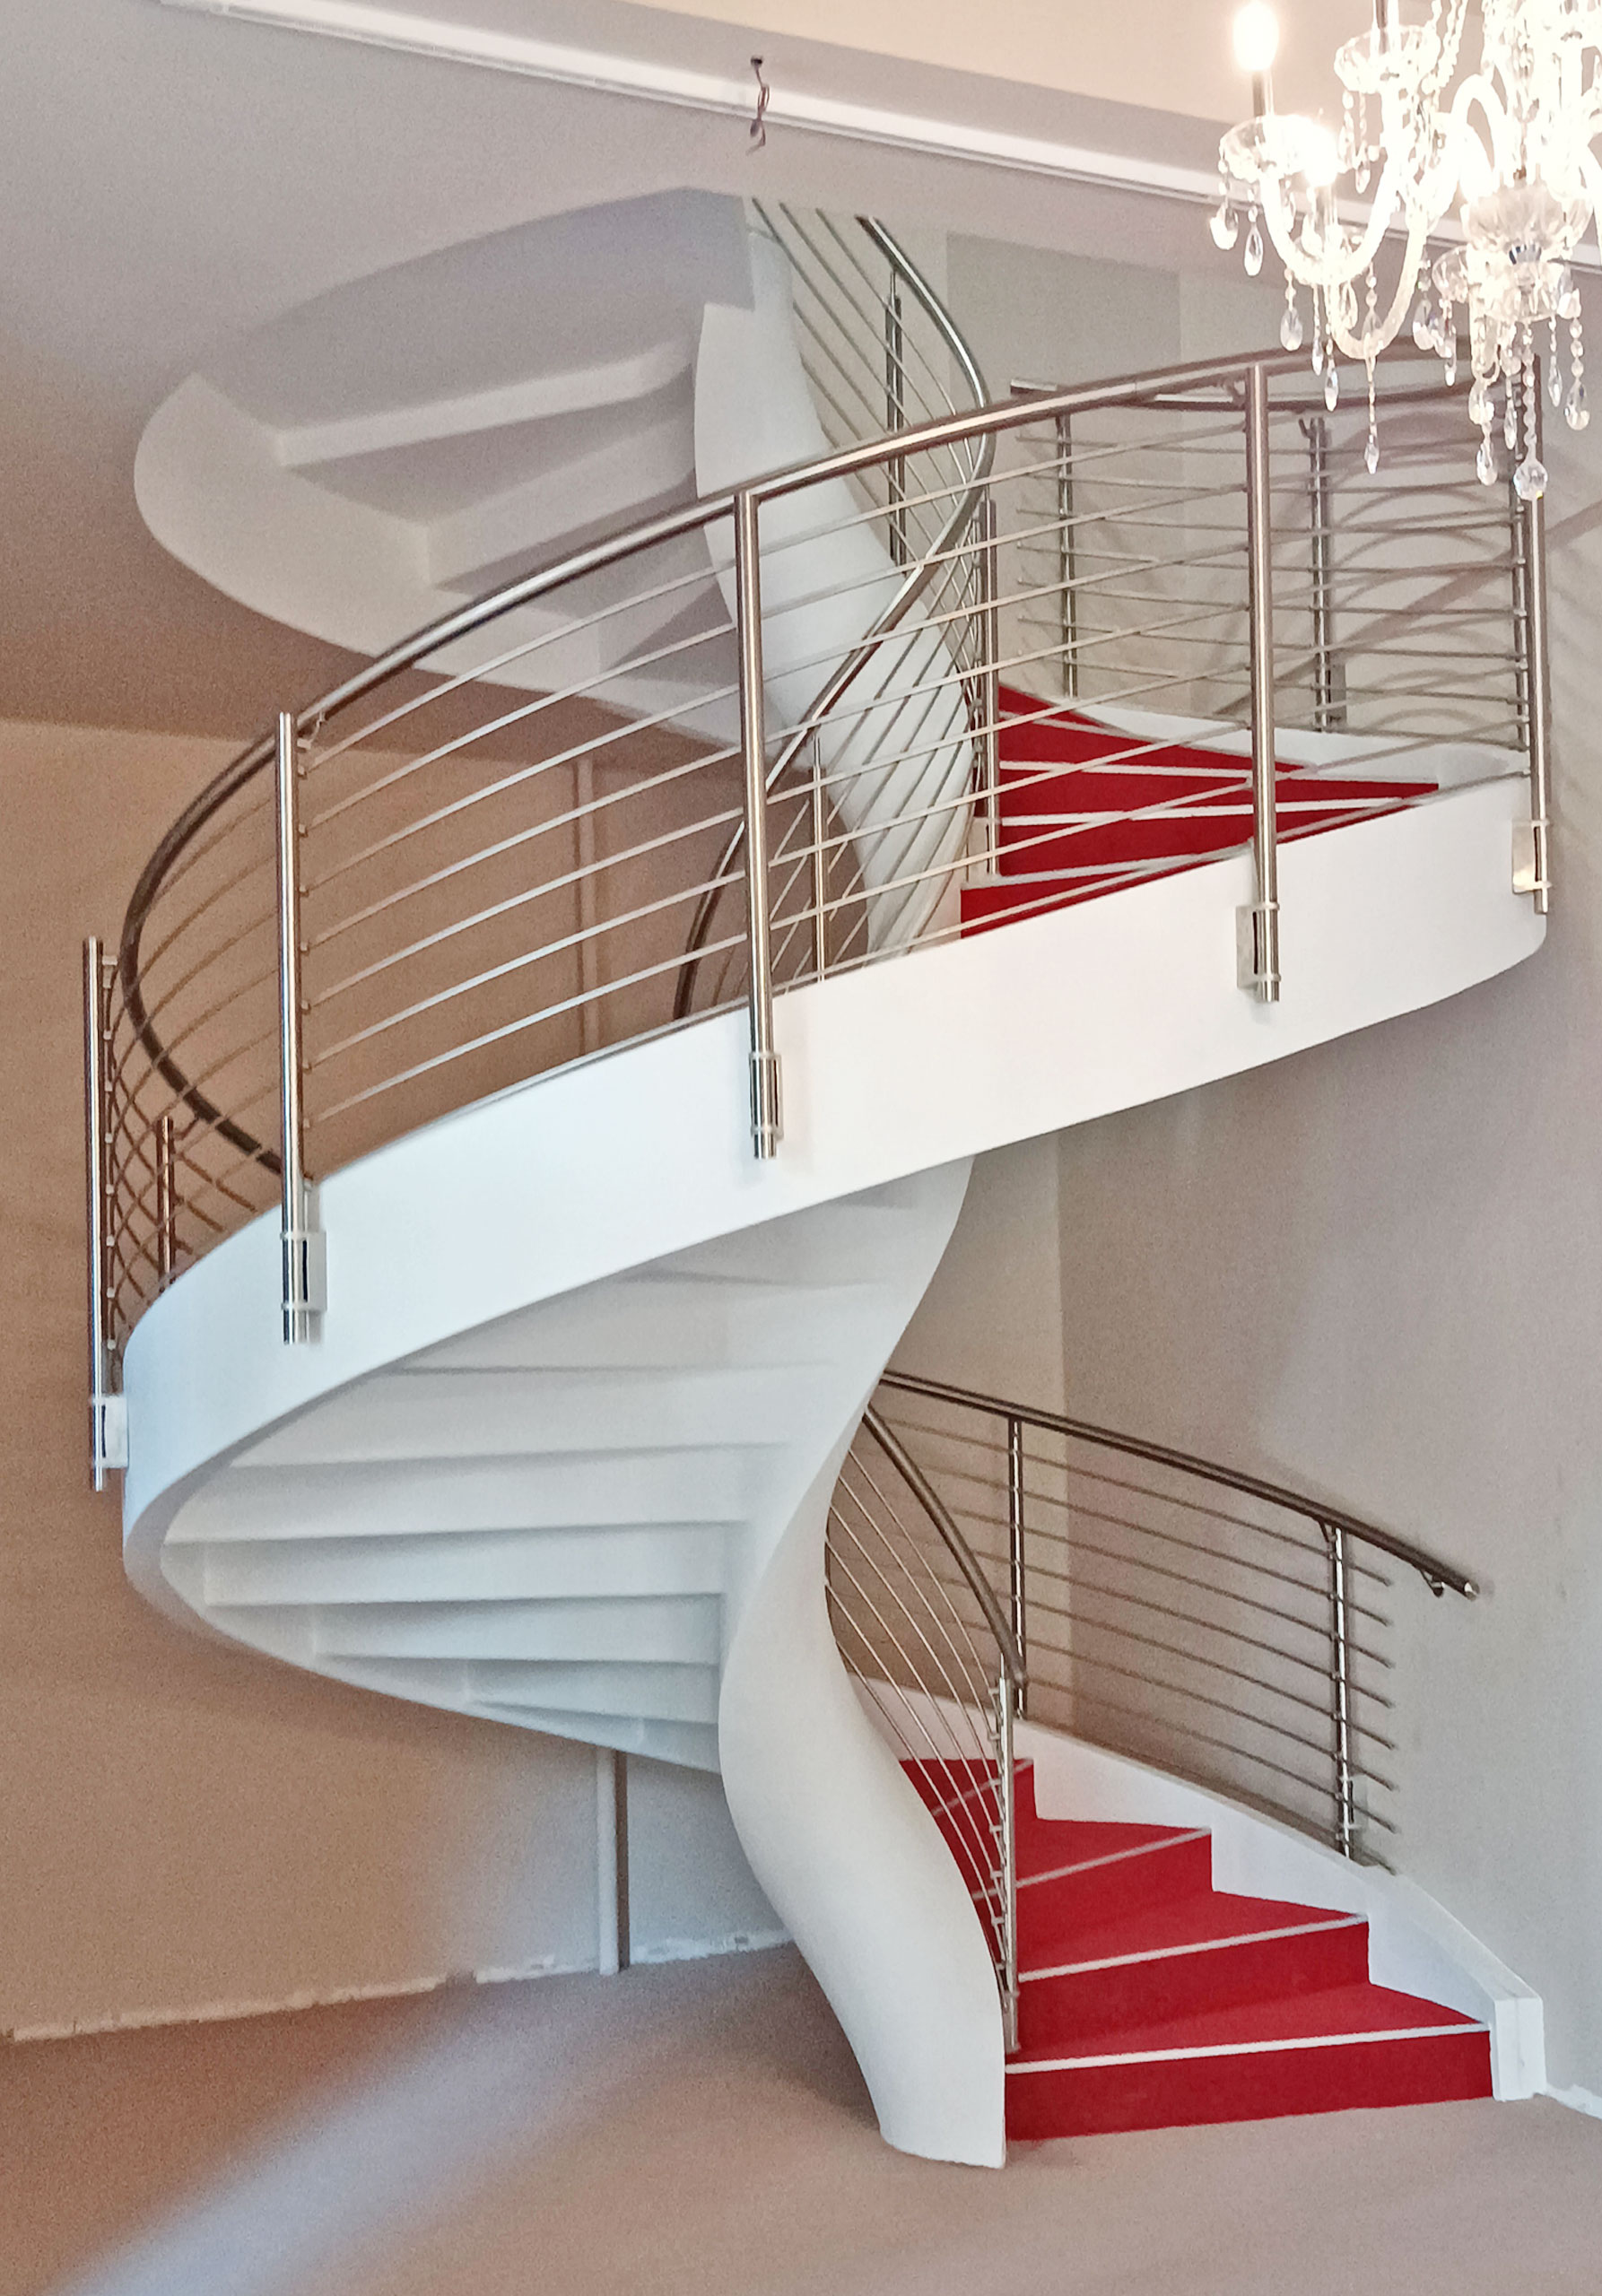 Helical staircase with red-carpeted steps built in a Verona school, Italy